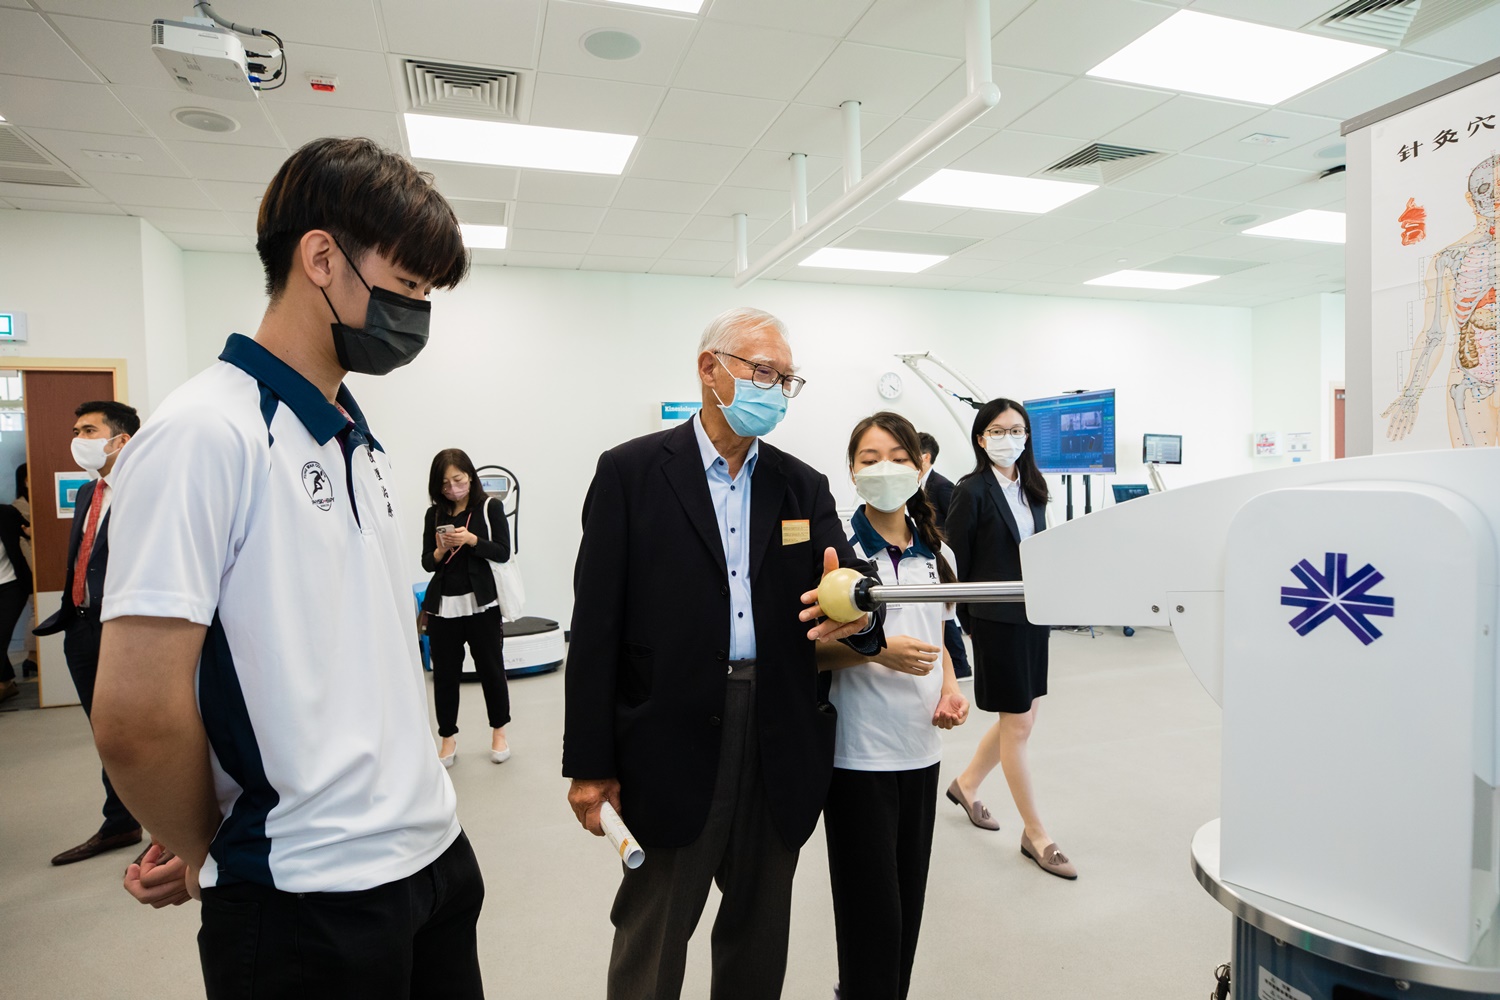 Guests visited Physiotherapy laboratory to understand the latest development of the programme.